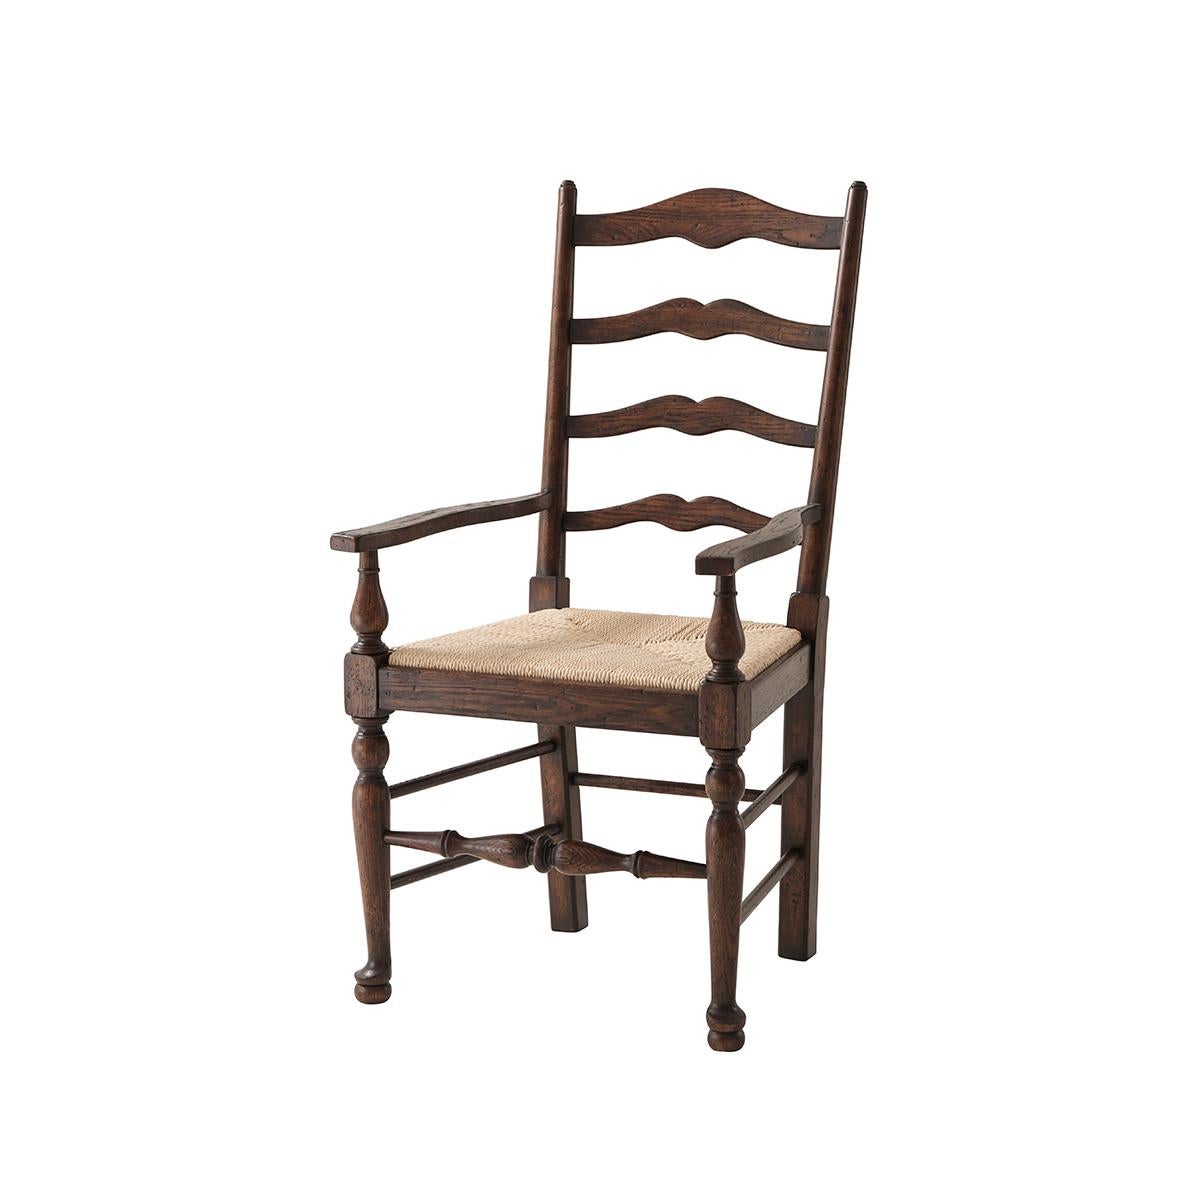 Oak ladder back armchairs, the bow arched bars between turned supports, above a hand woven faux rush seat, on turned legs with pad and ball feet. Inspired by an 18th century English original.
Dimensions: 22.25